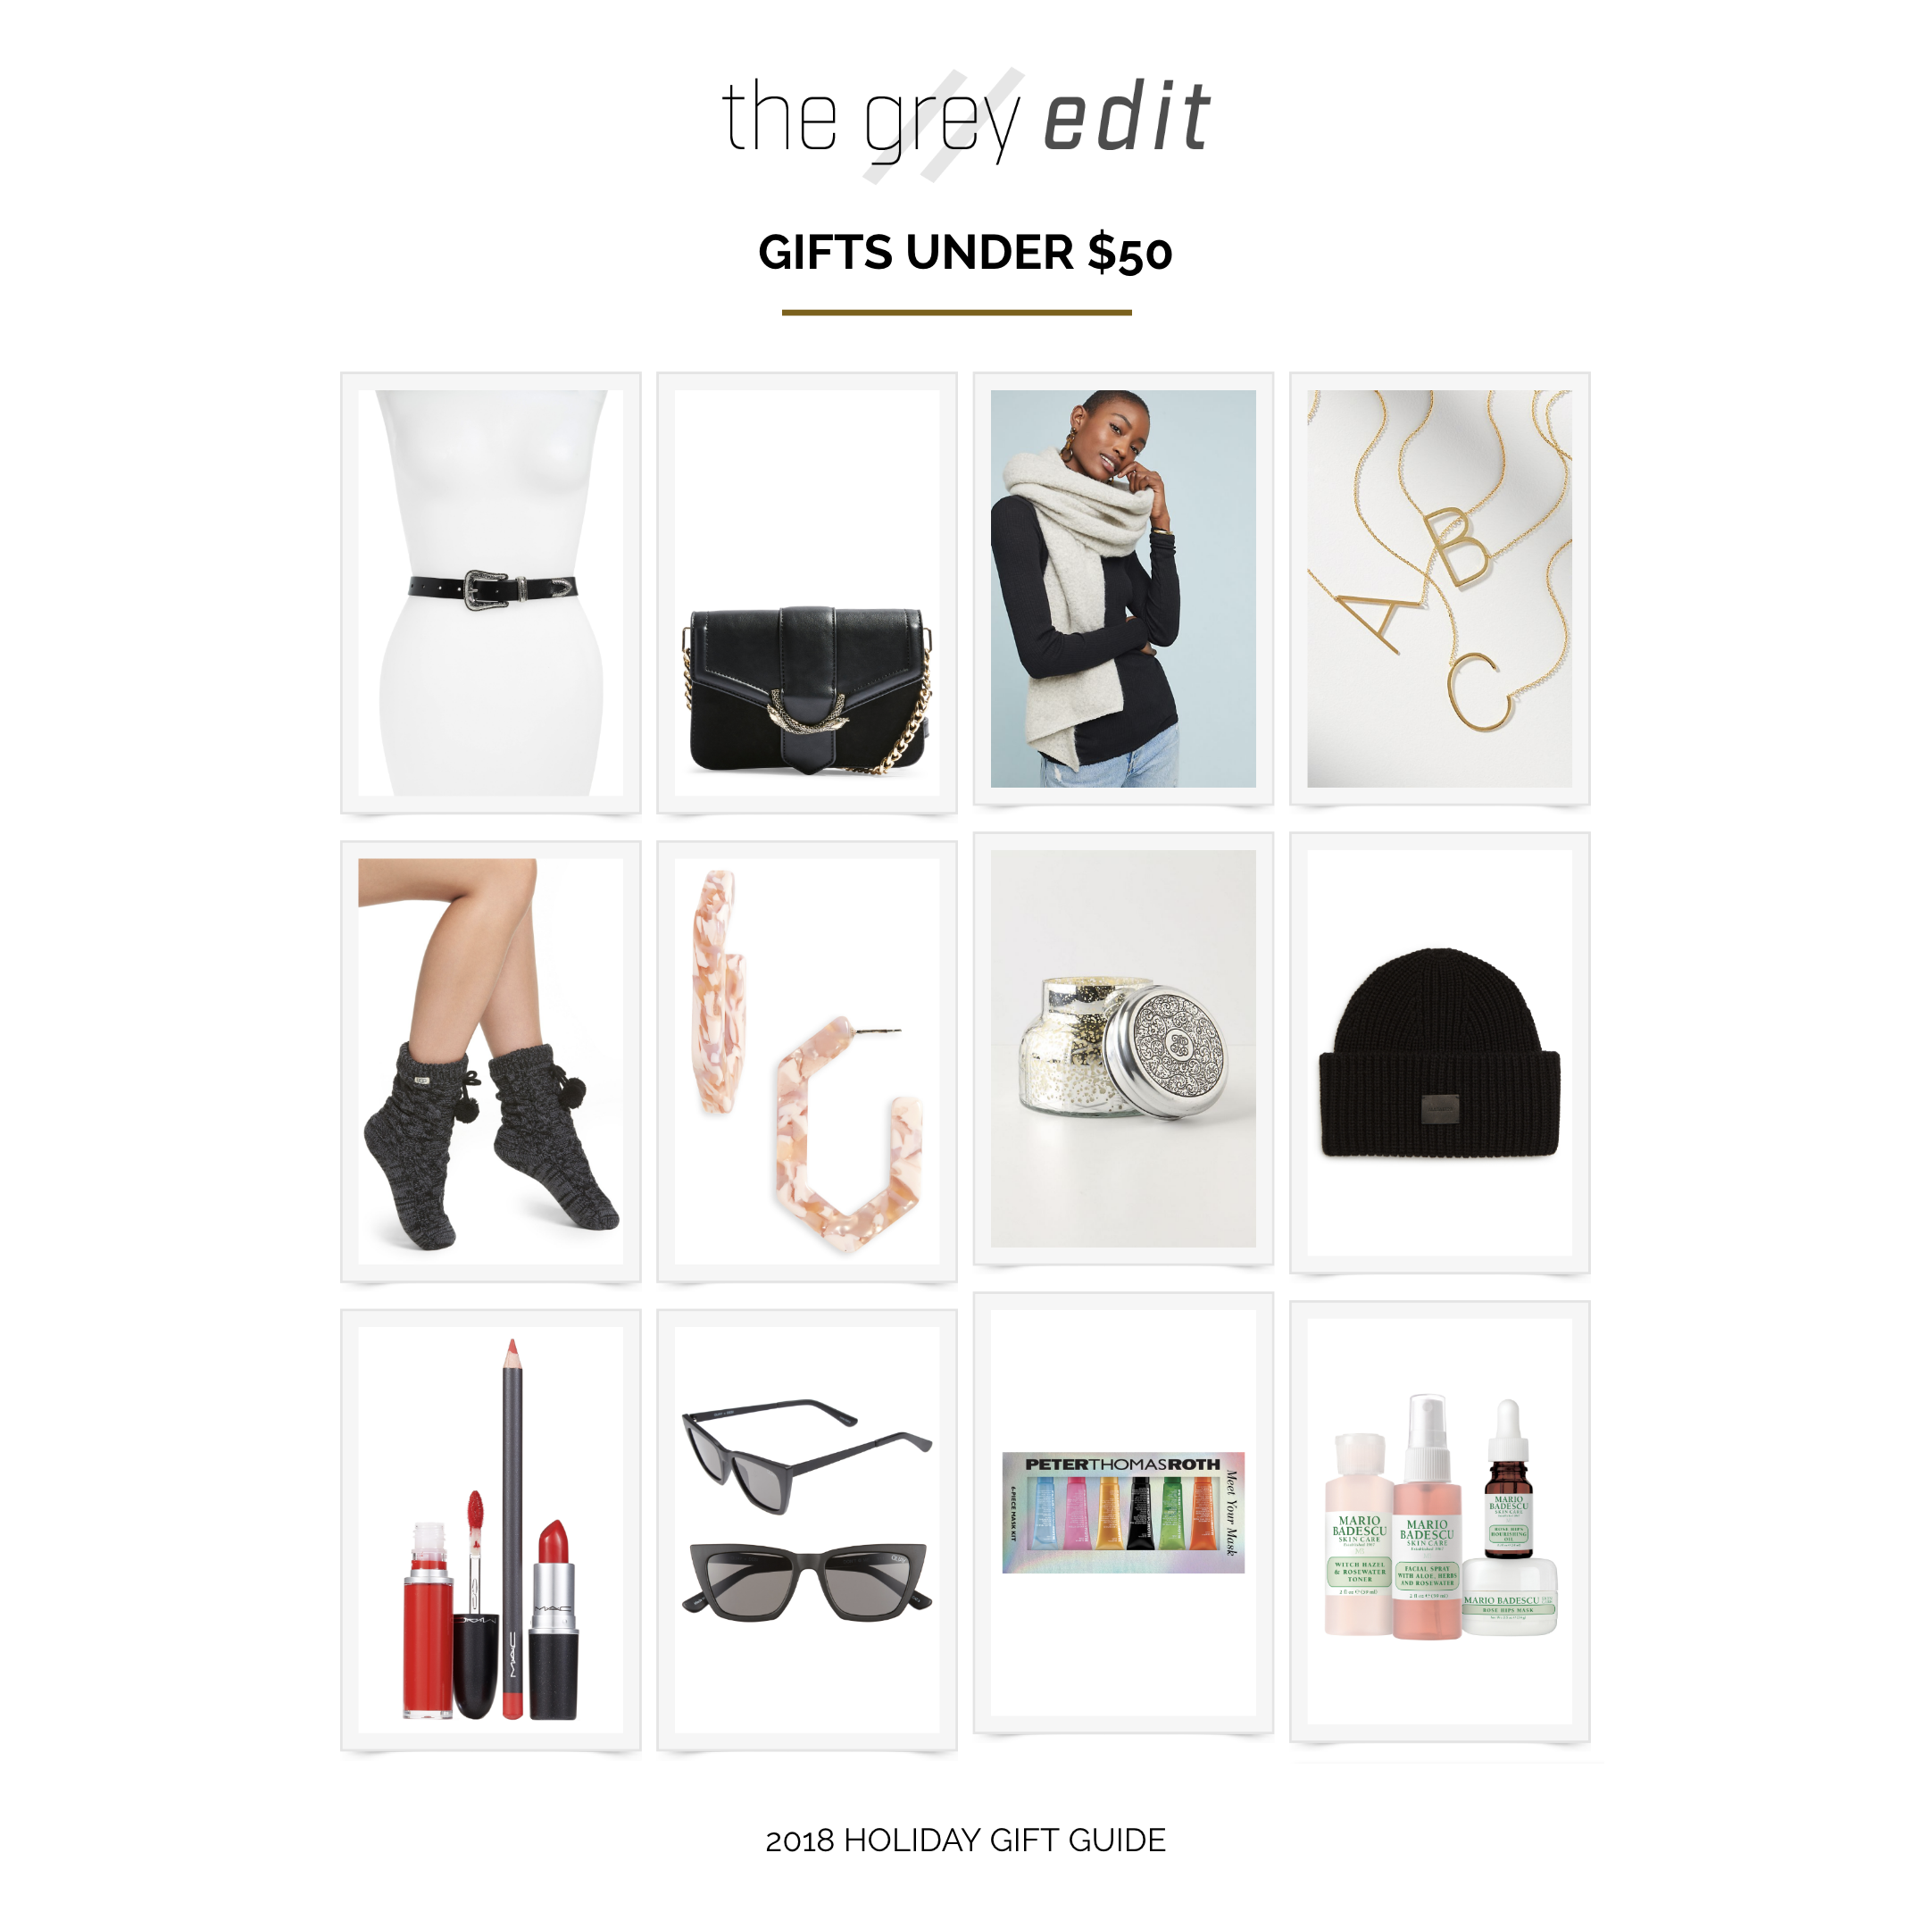 The Grey Edit - 2018 Holiday Gift Guide - Gifts Under $50